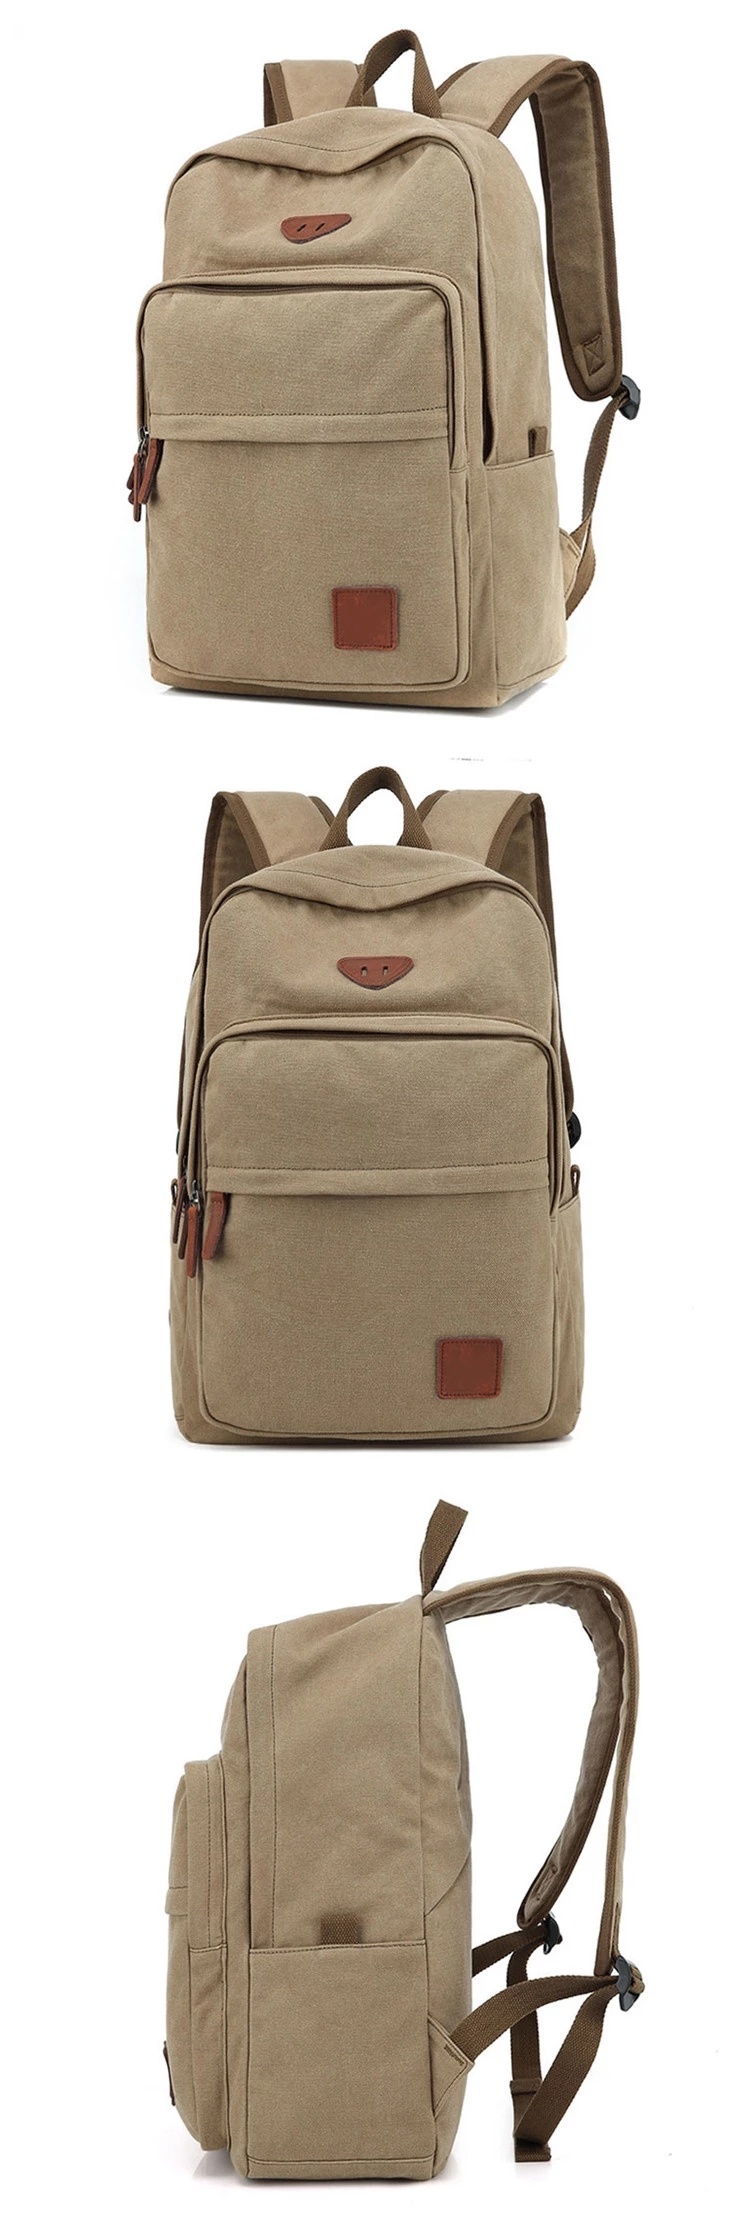 Wholesale Lightweight Canvas Backpack Bags Vintage School Canvas Bags